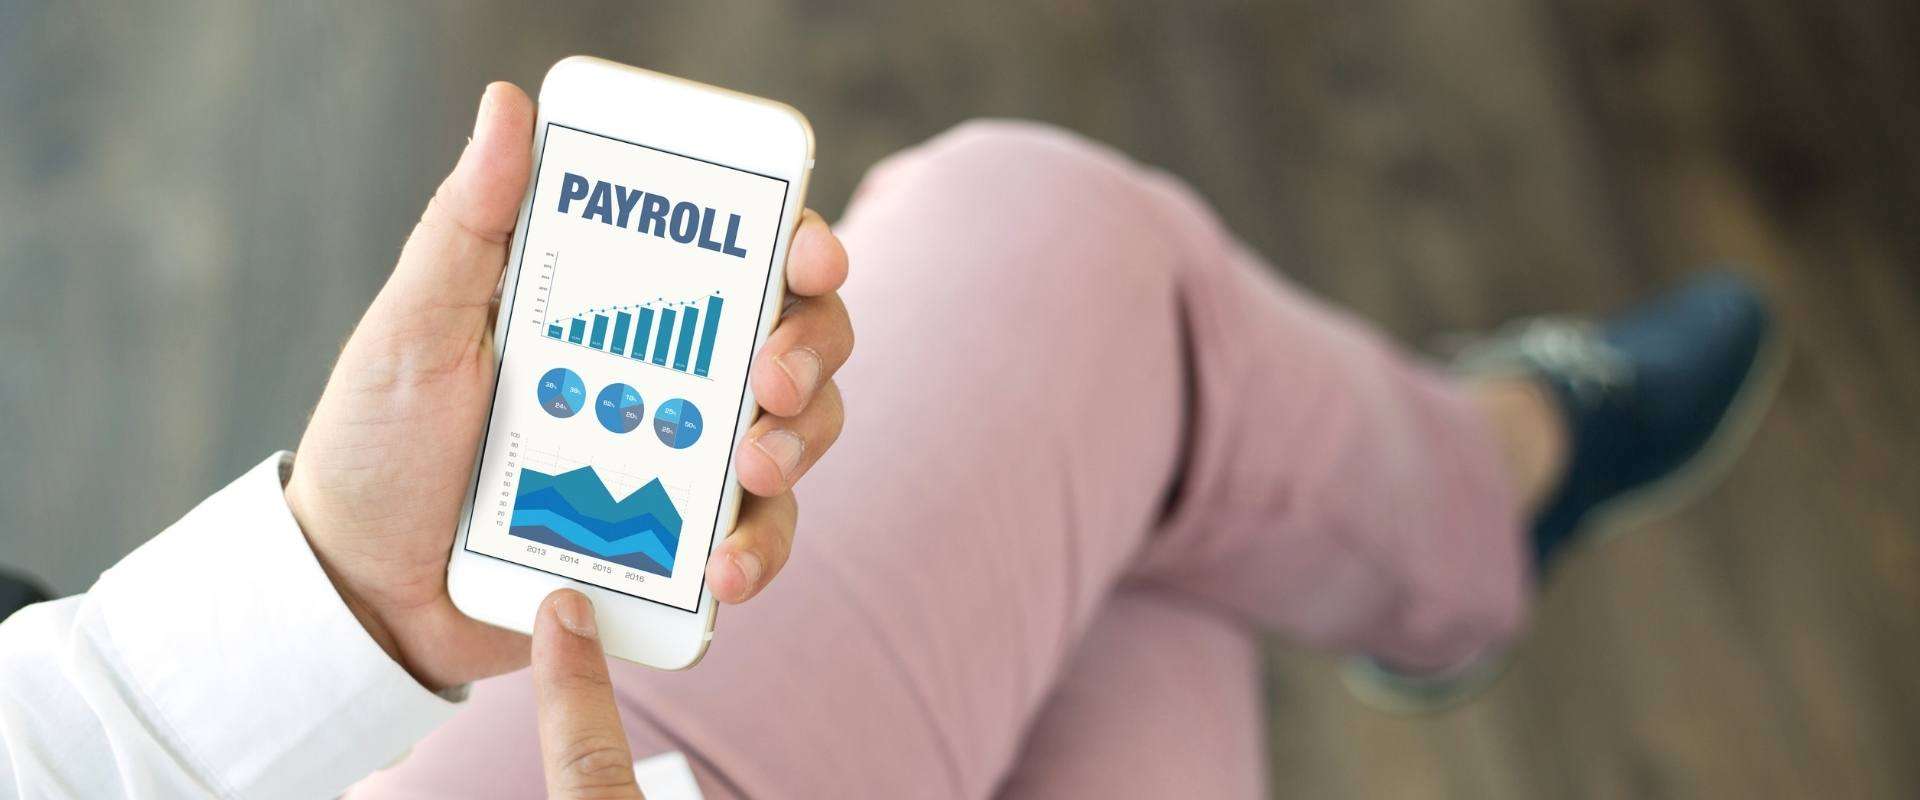 How to Improve The Quality of Your Payroll Process